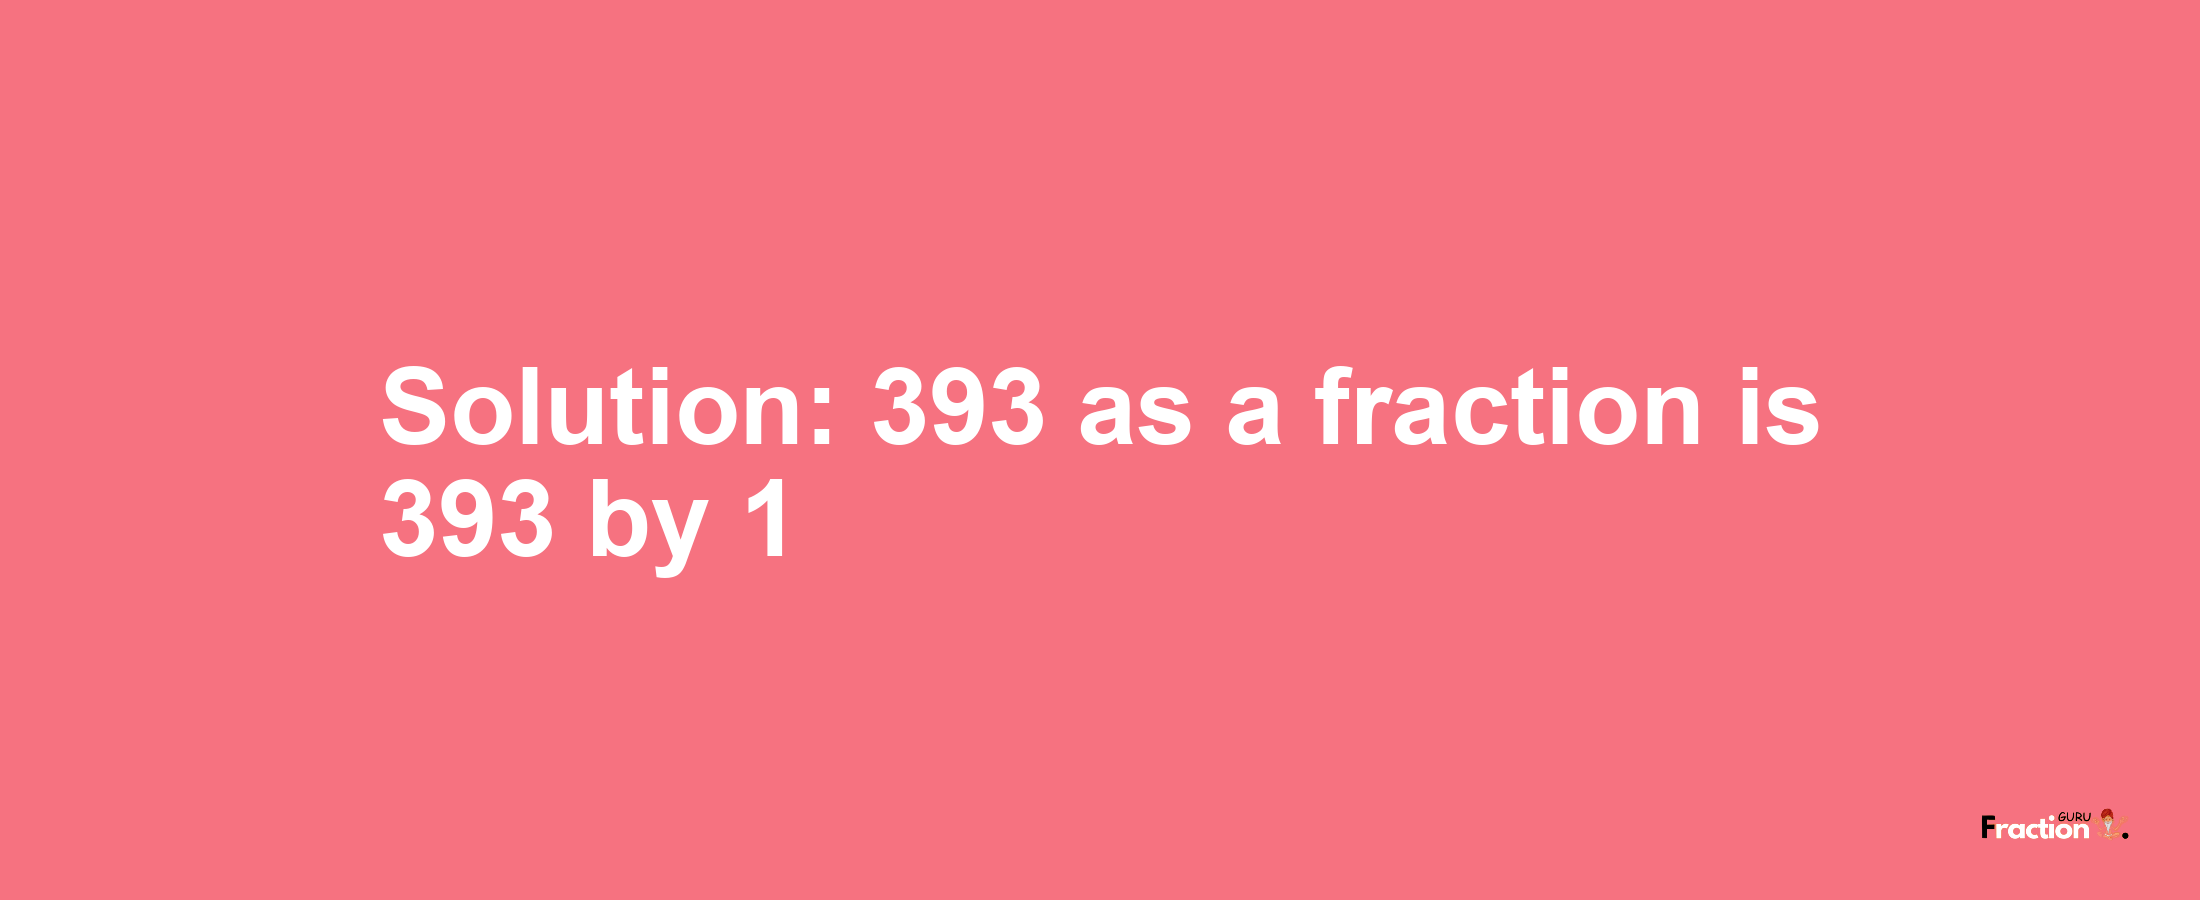 Solution:393 as a fraction is 393/1